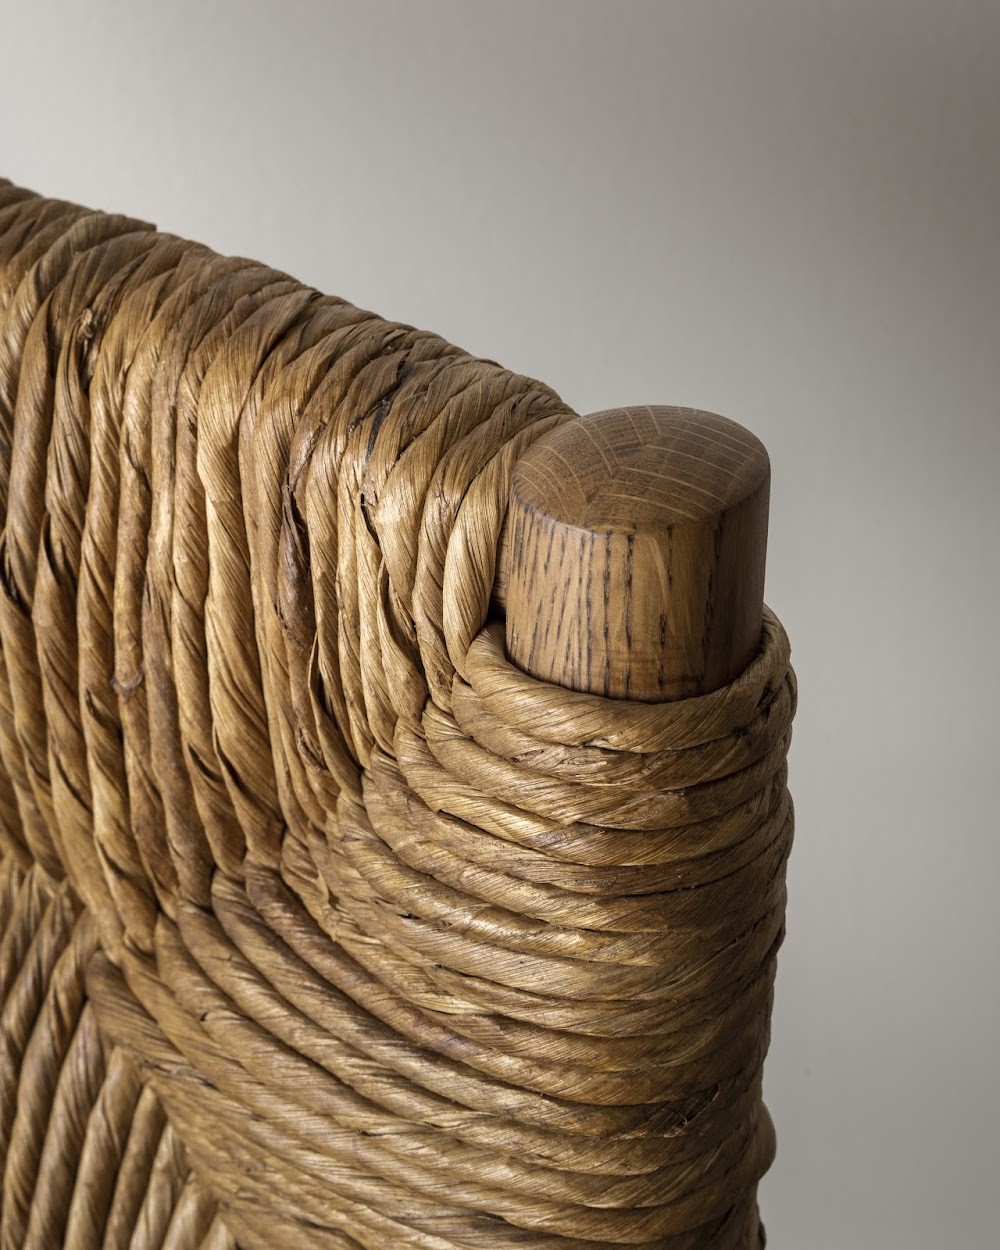 a close up of a wooden headboard made of rope